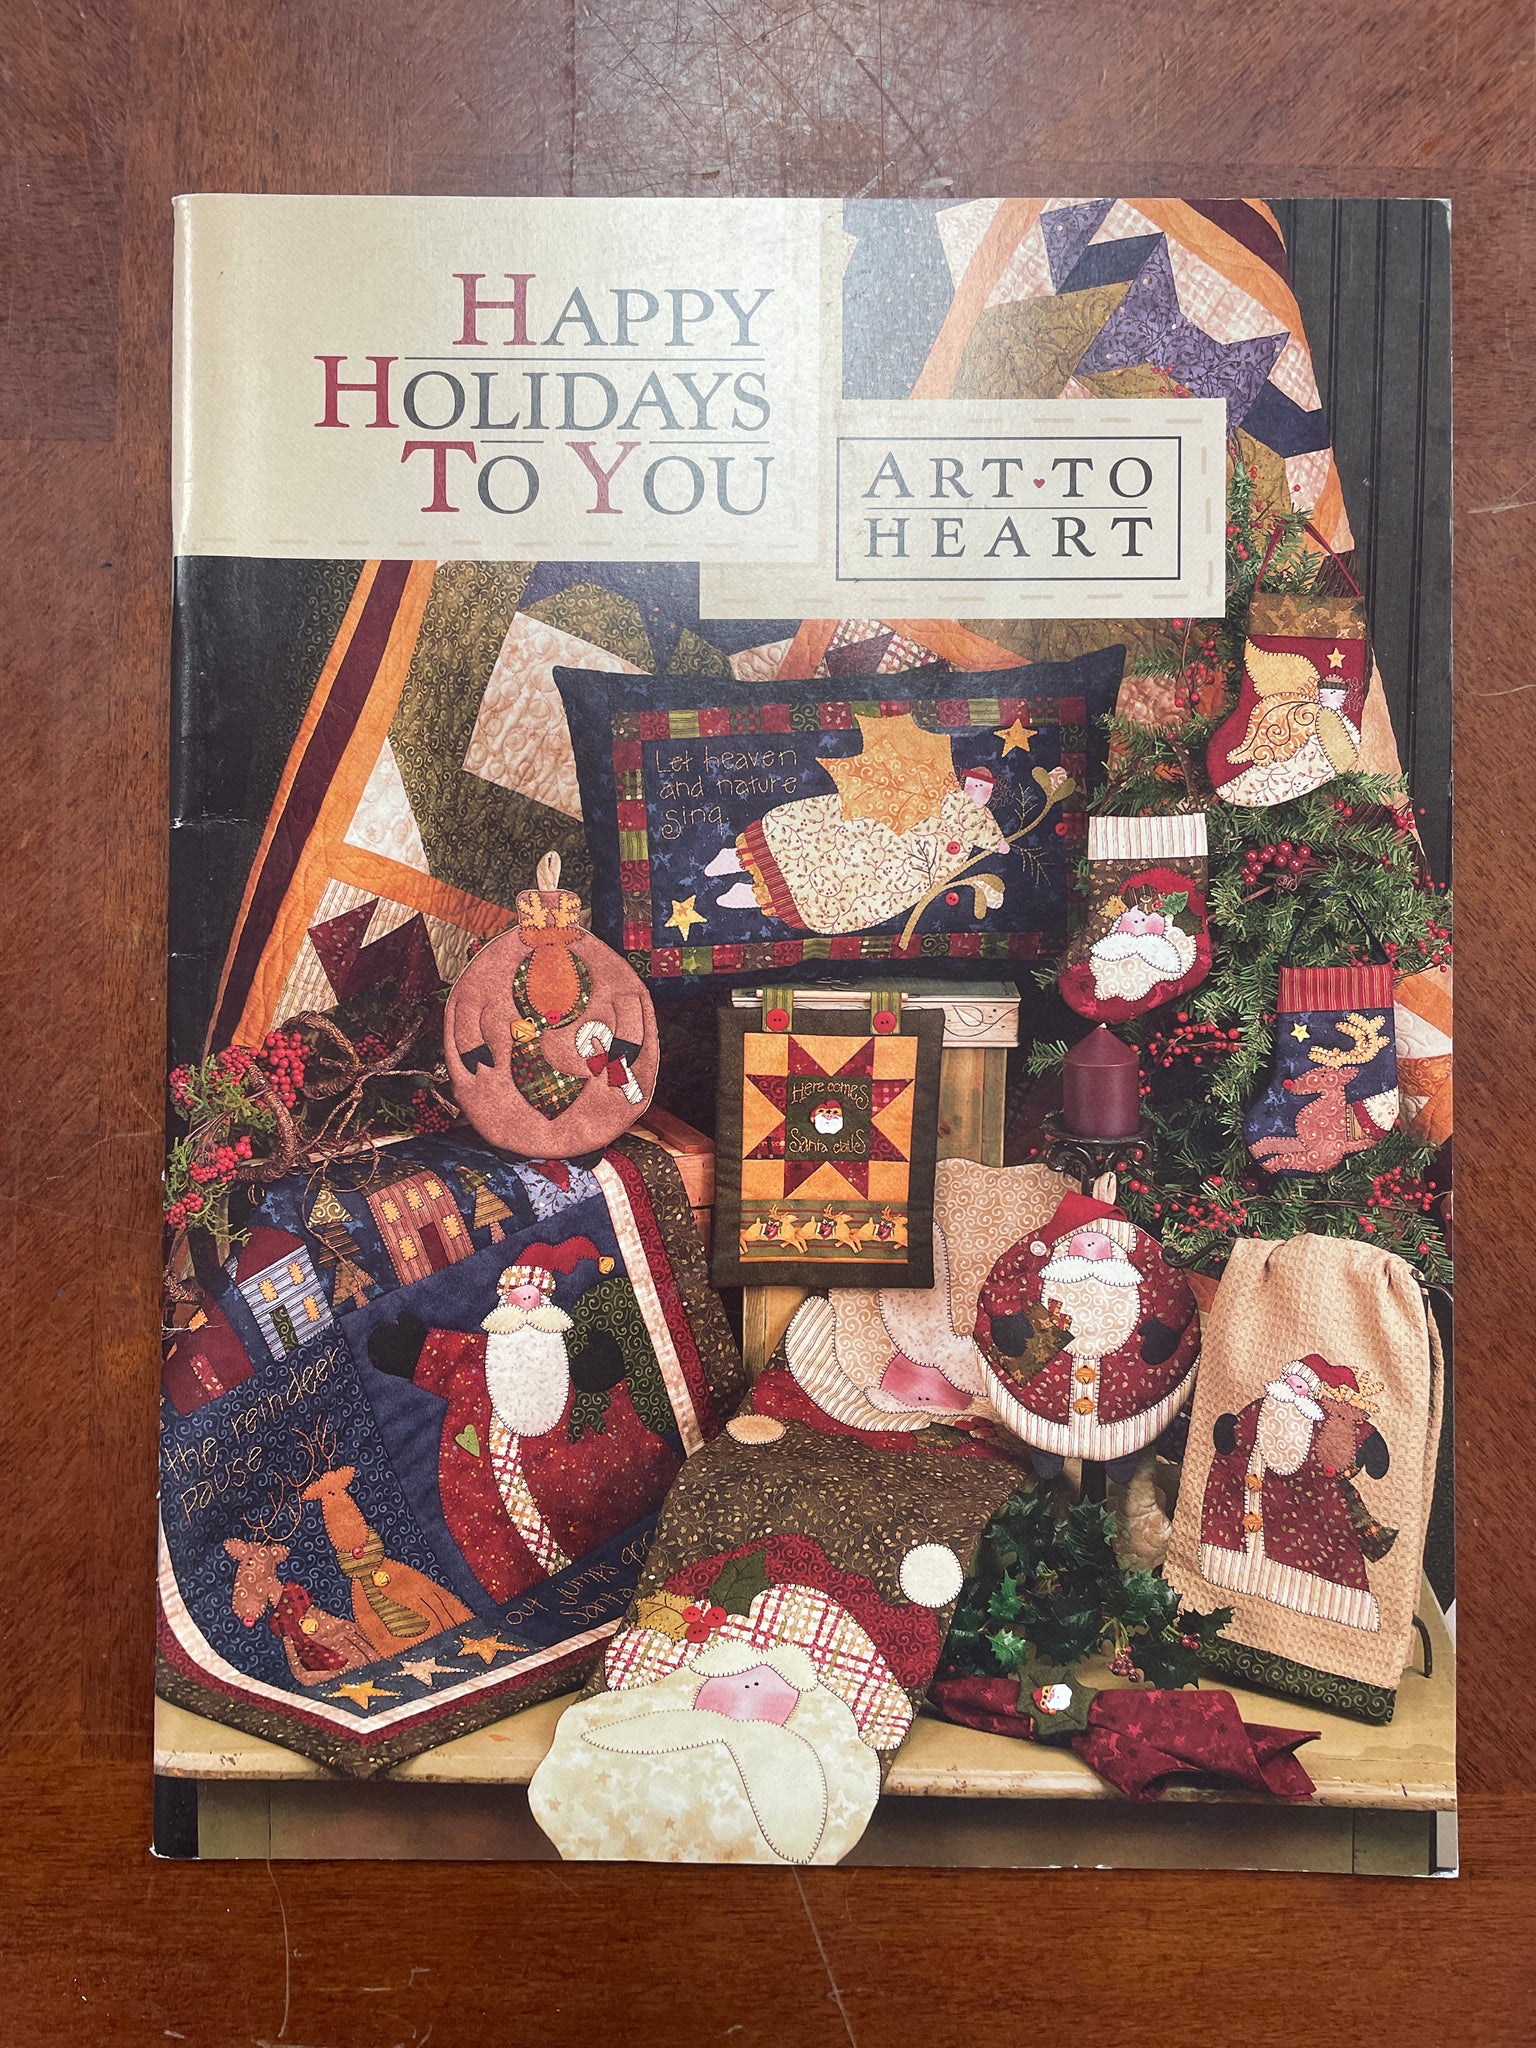 2003 Quilted Appliqué Pattern Book - "Happy Holidays to You"